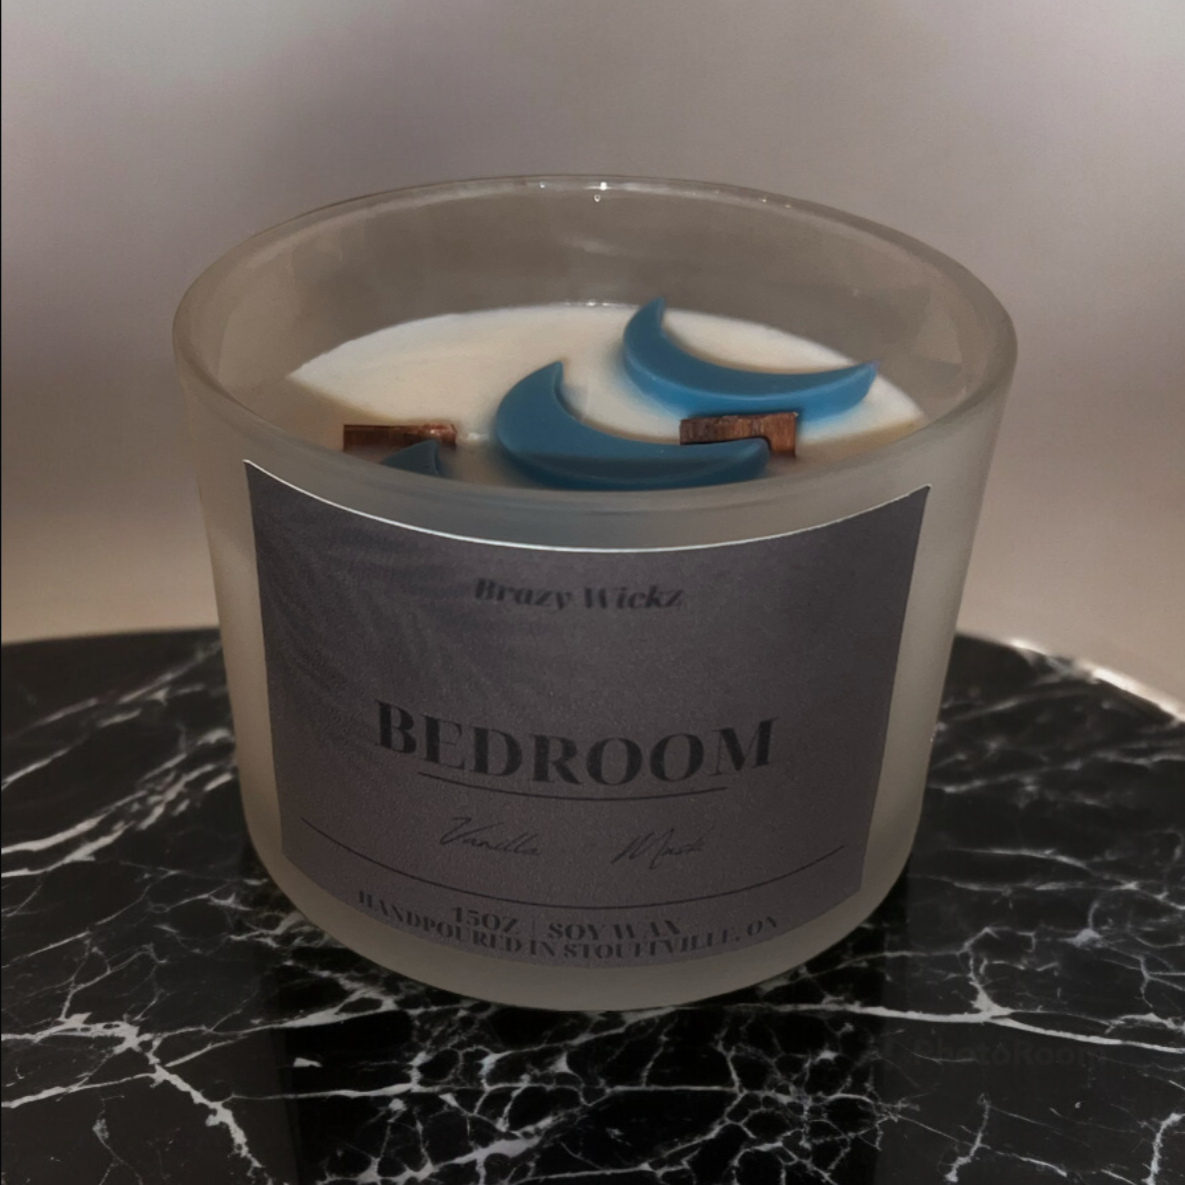 Bedroom Candle